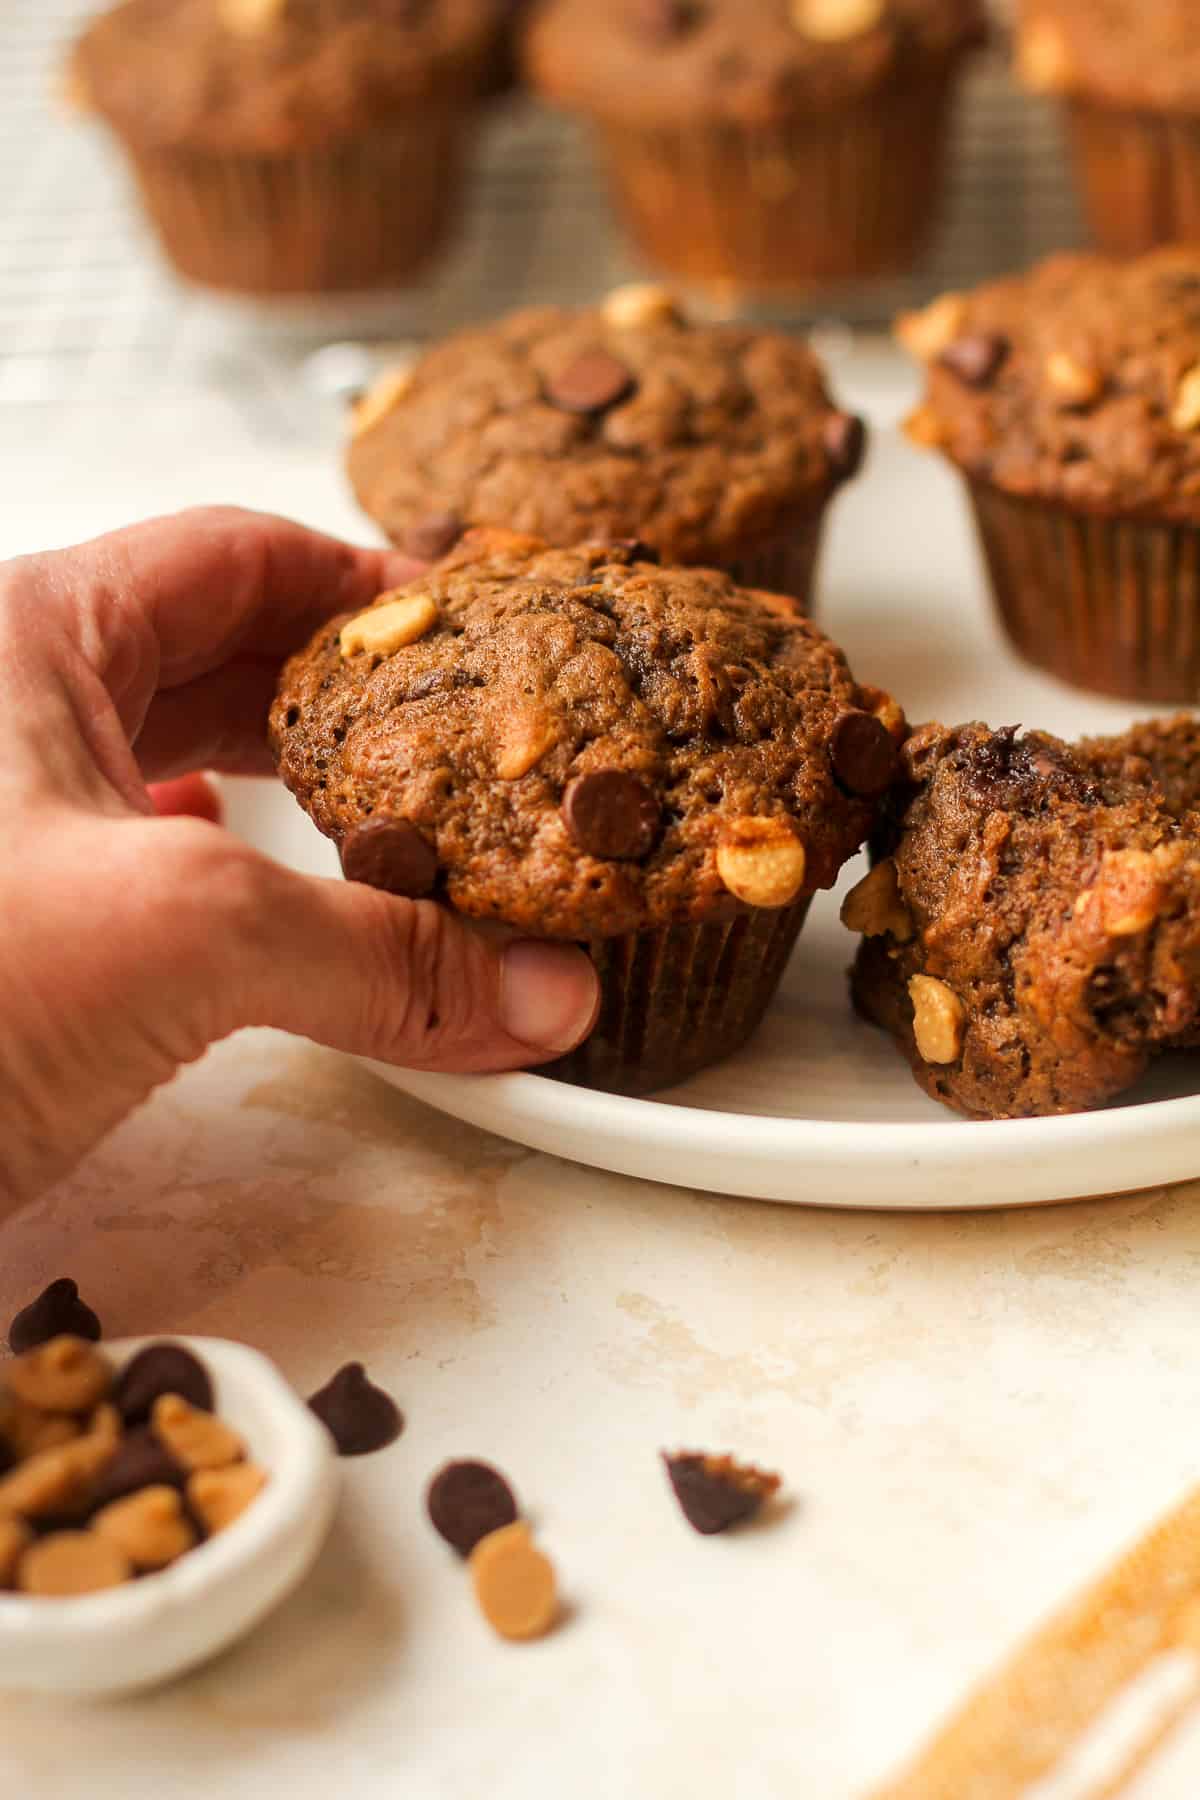 Side view of a plate muffins with a hand reaching for one.